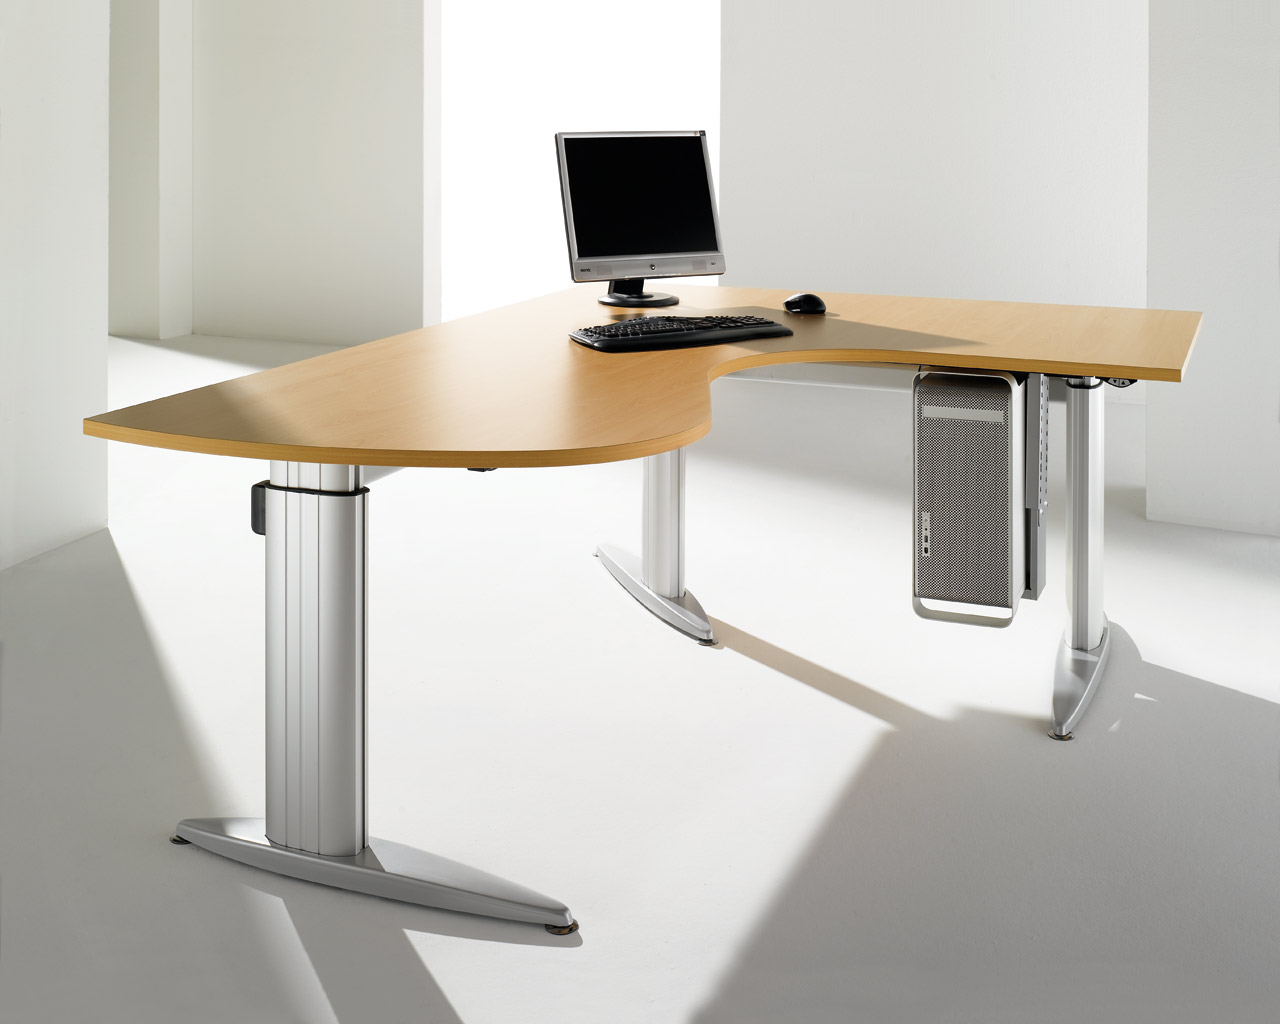 BZ Plankenhorn products - your specialist for office desks and height-adjustable stand and sit solutions.